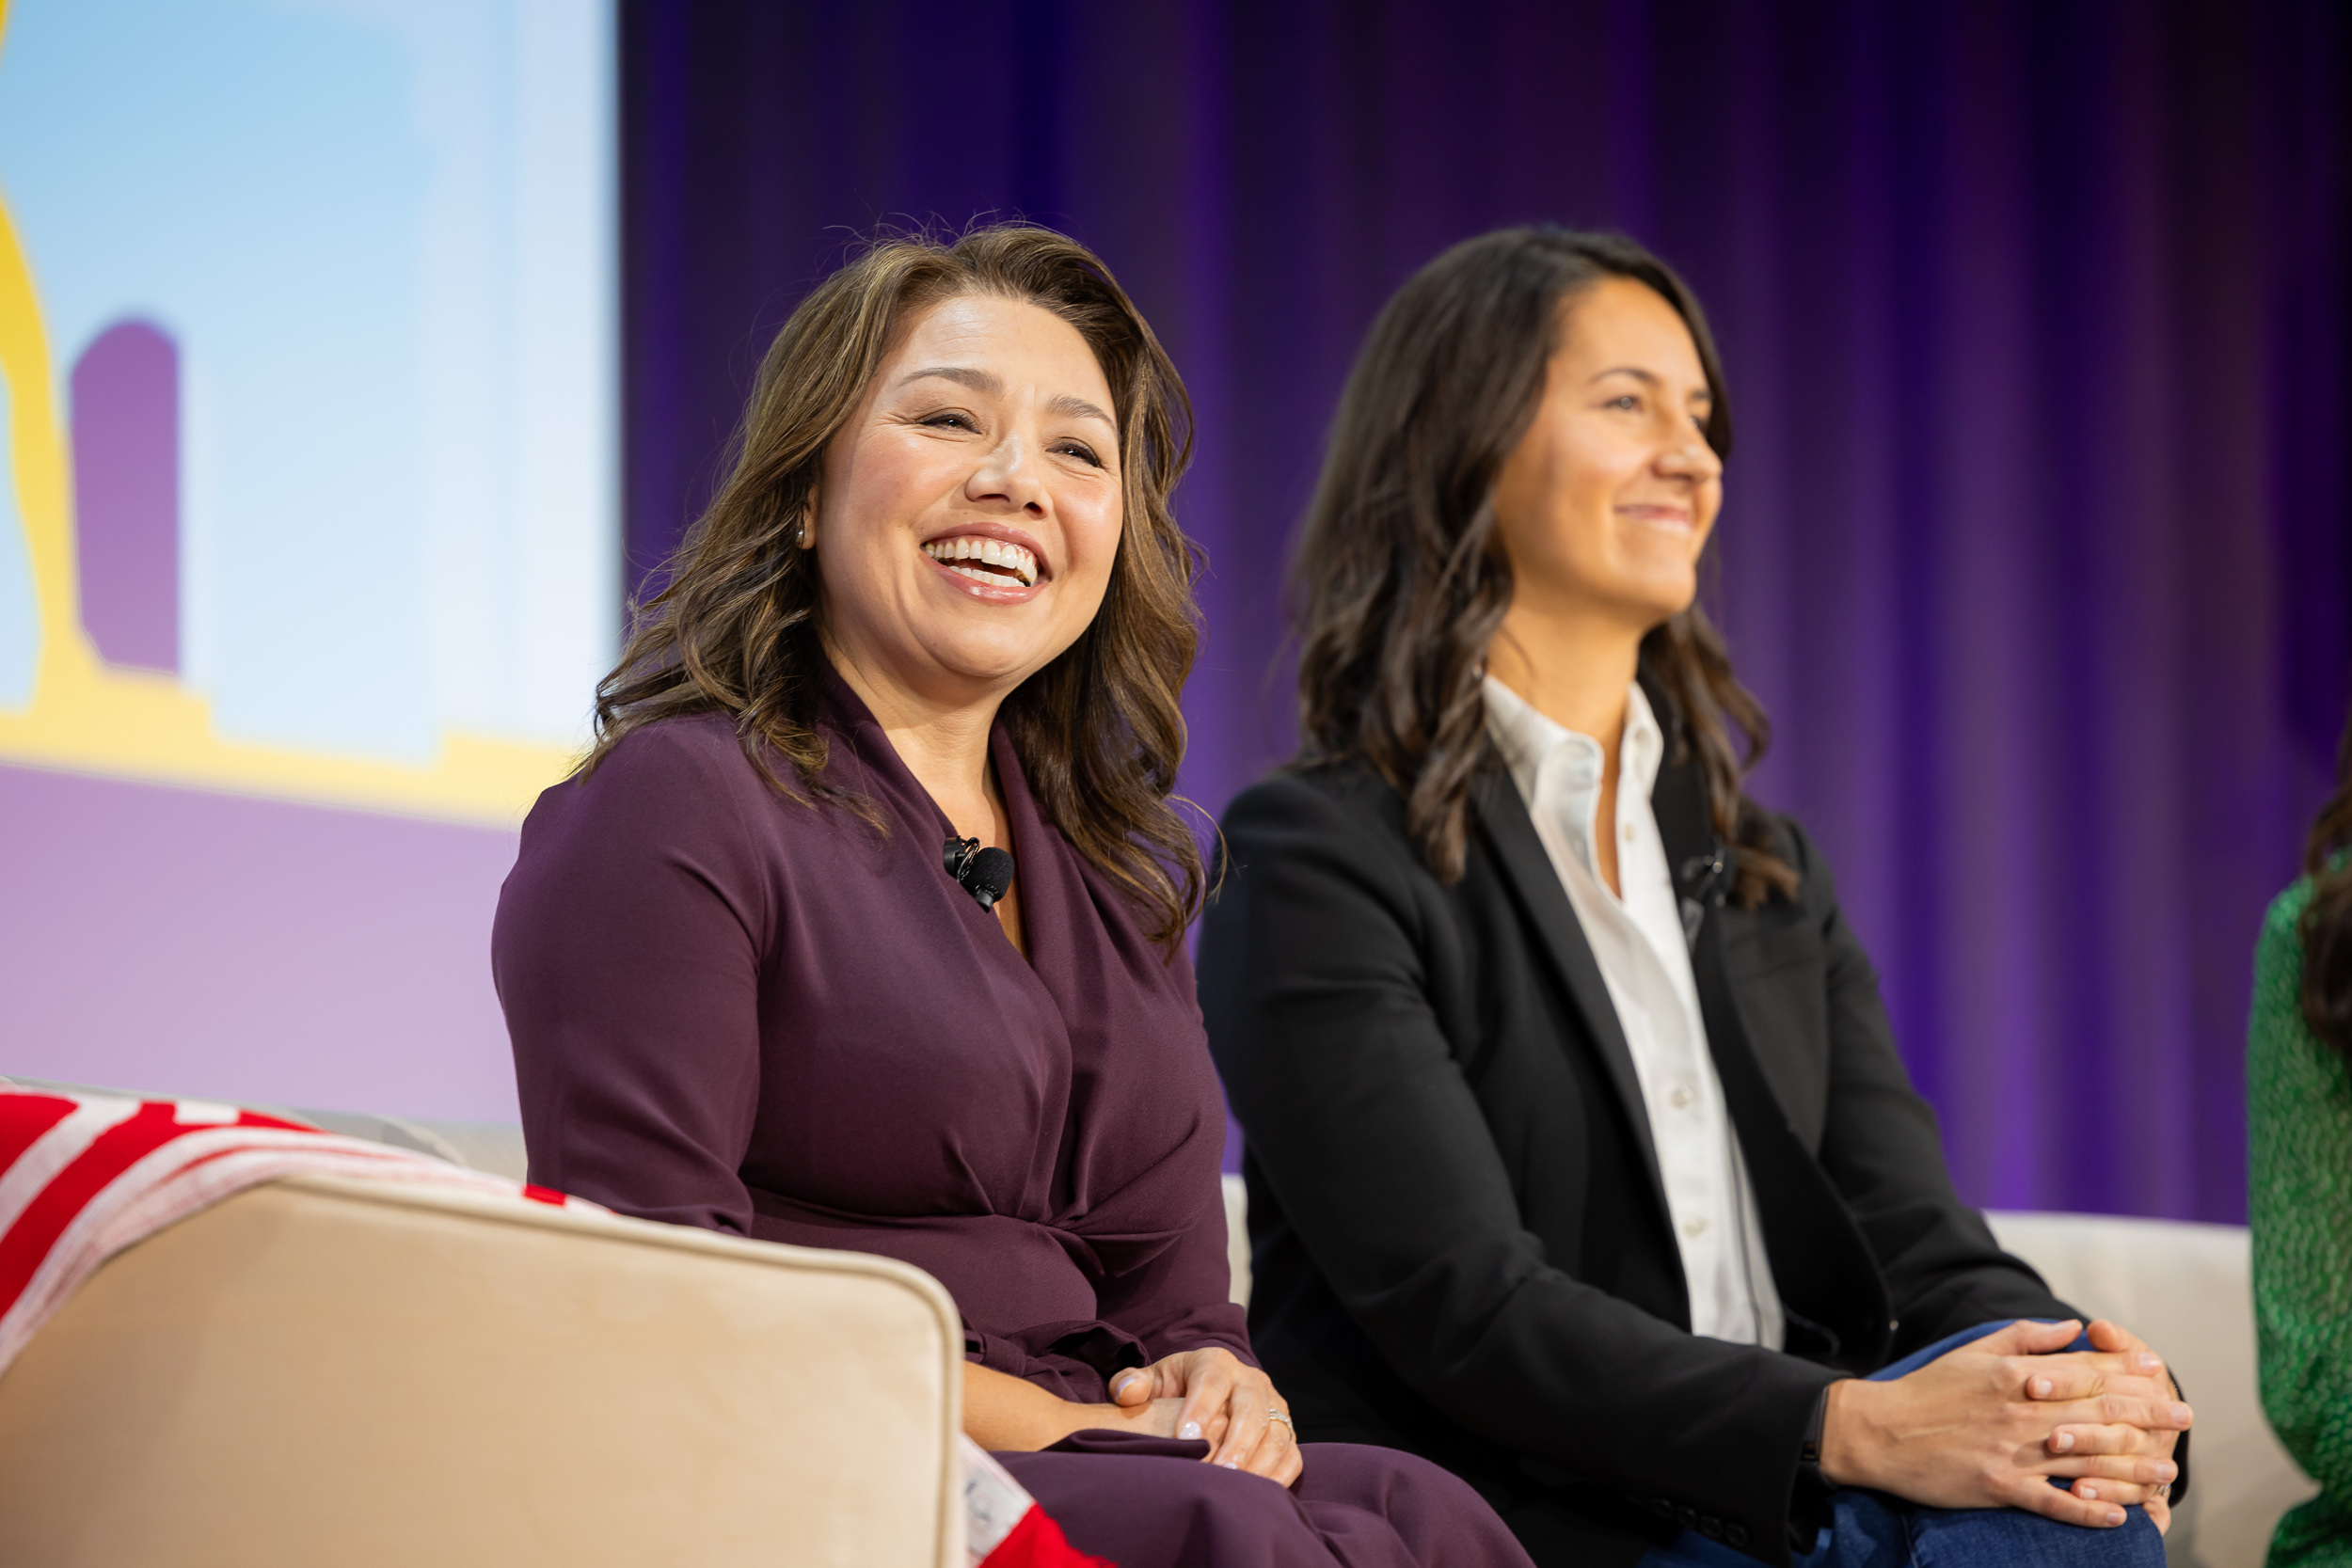 A photo of Lena Waters sitting next to Hannah Pscheid on a couch during the Activate keynote.